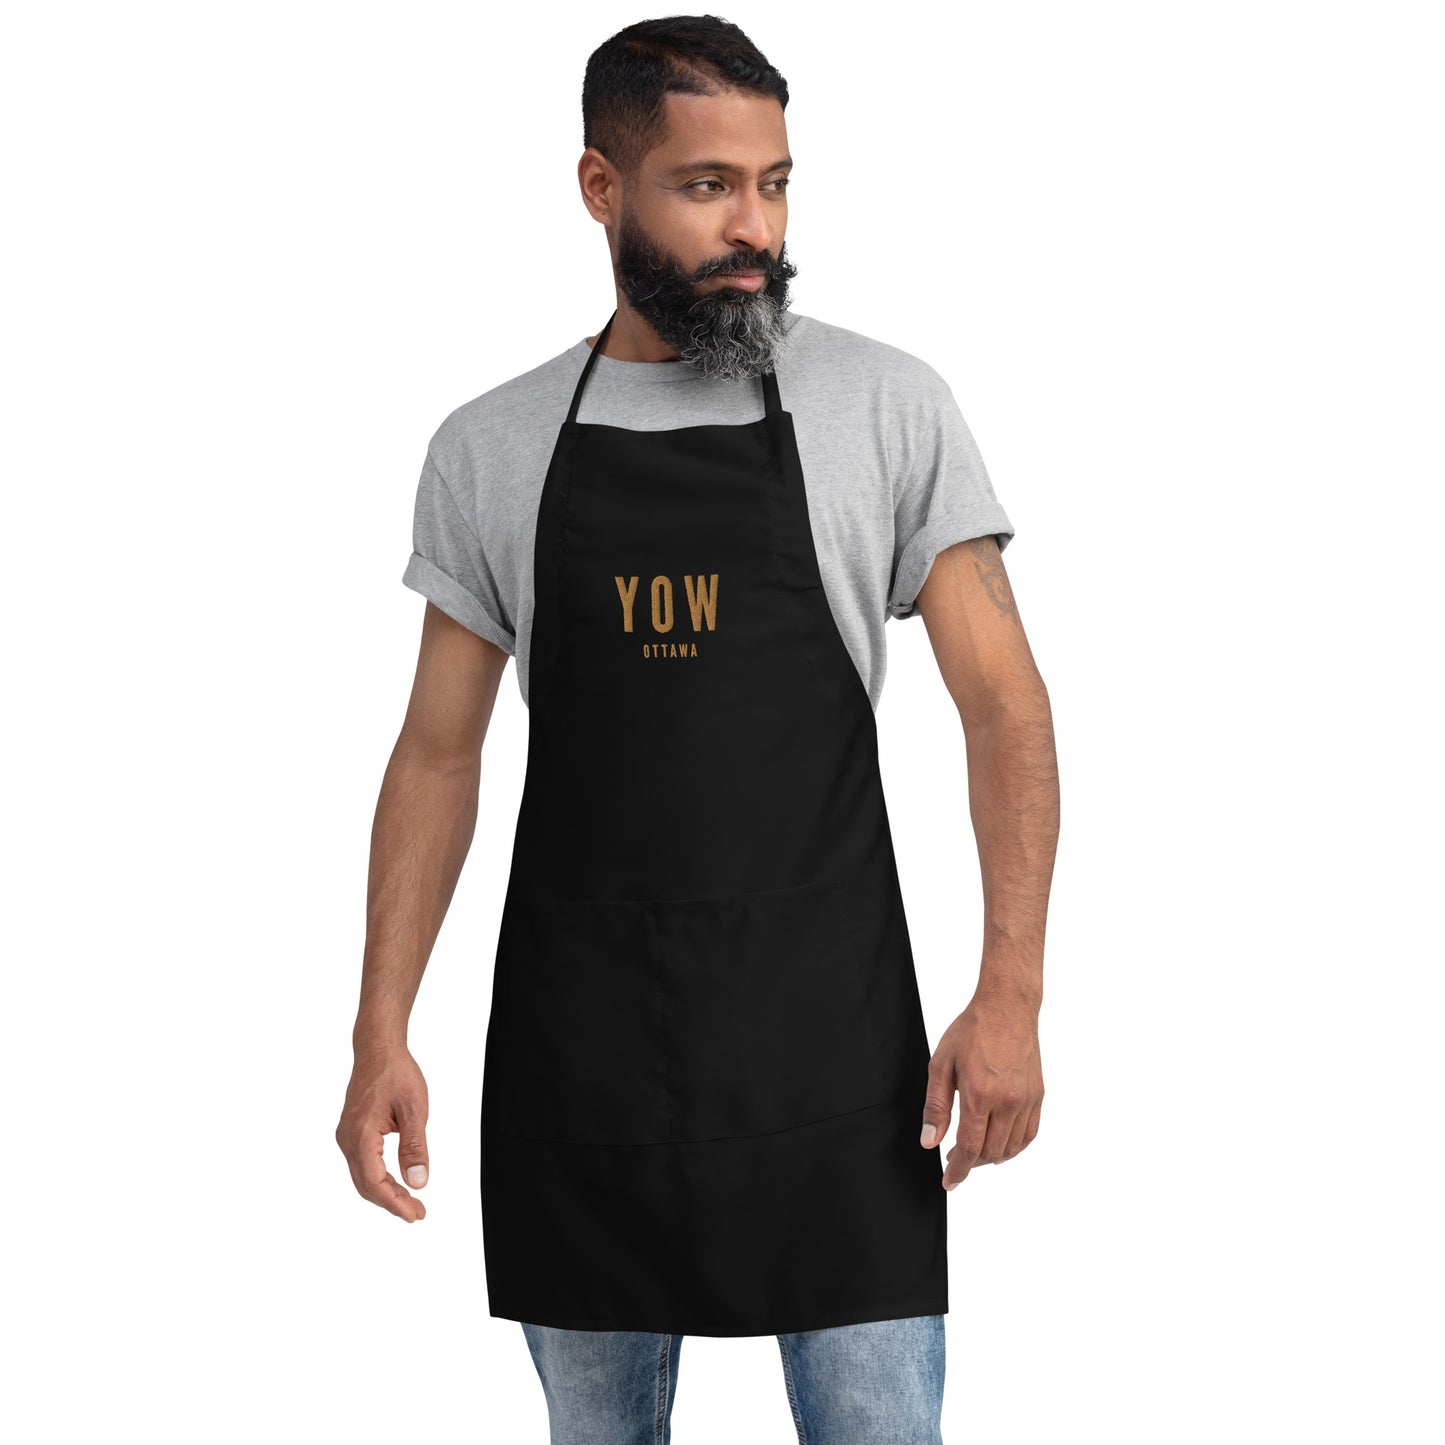 City Embroidered Apron - Old Gold • YOW Ottawa • YHM Designs - Image 05